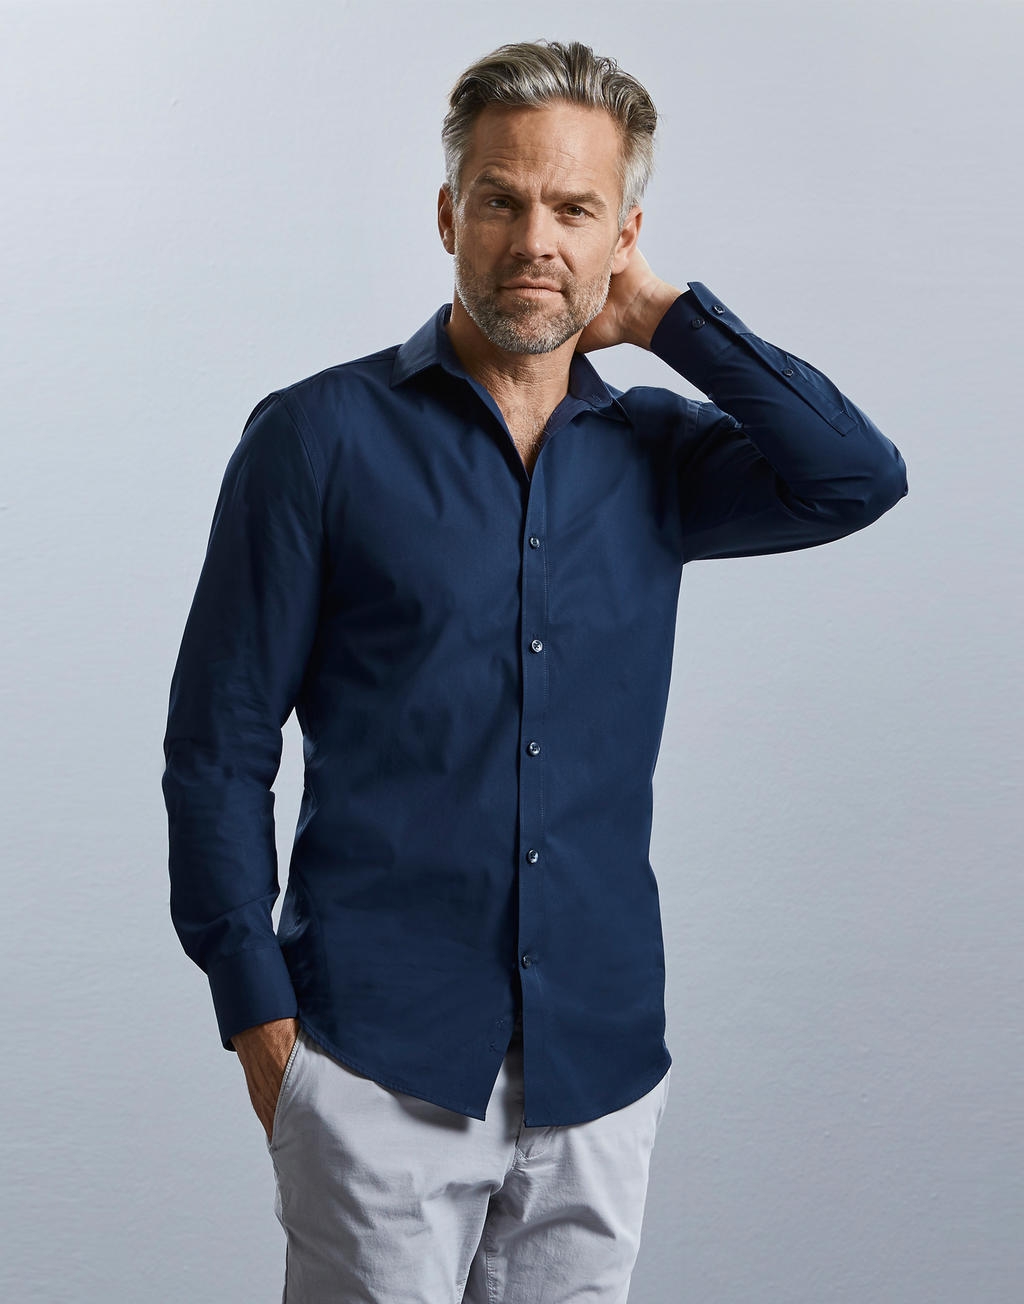  Mens LS Ultimate Stretch Shirt in Farbe White